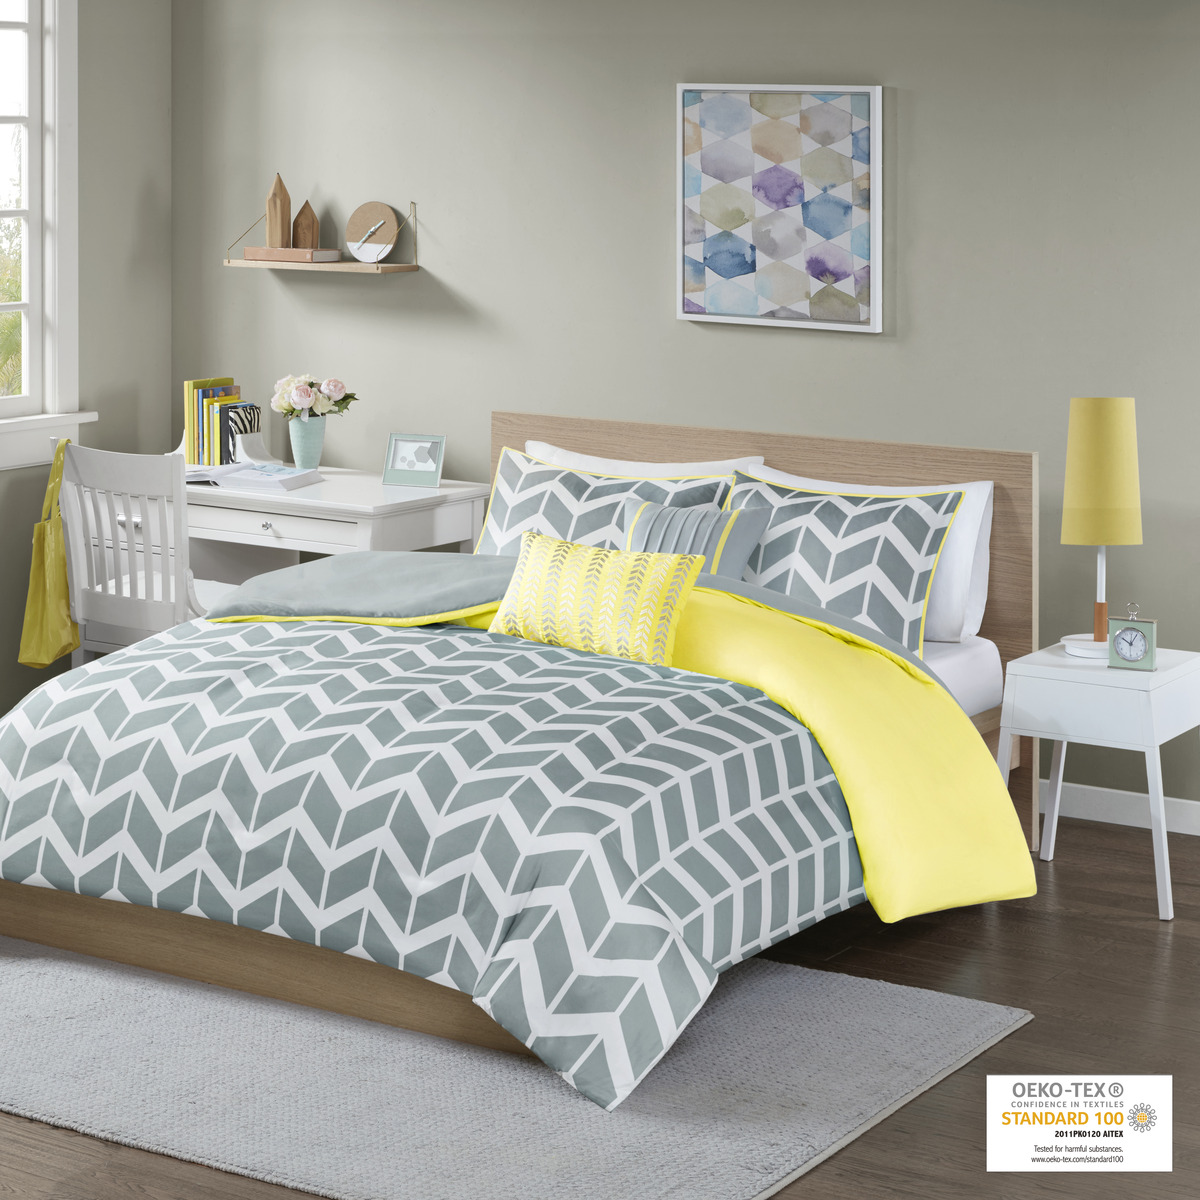 Home Essence Apartment Darcy Yellow Chevron 4 Piece Duvet Cover Set, Twin/Twin-XL - image 1 of 8